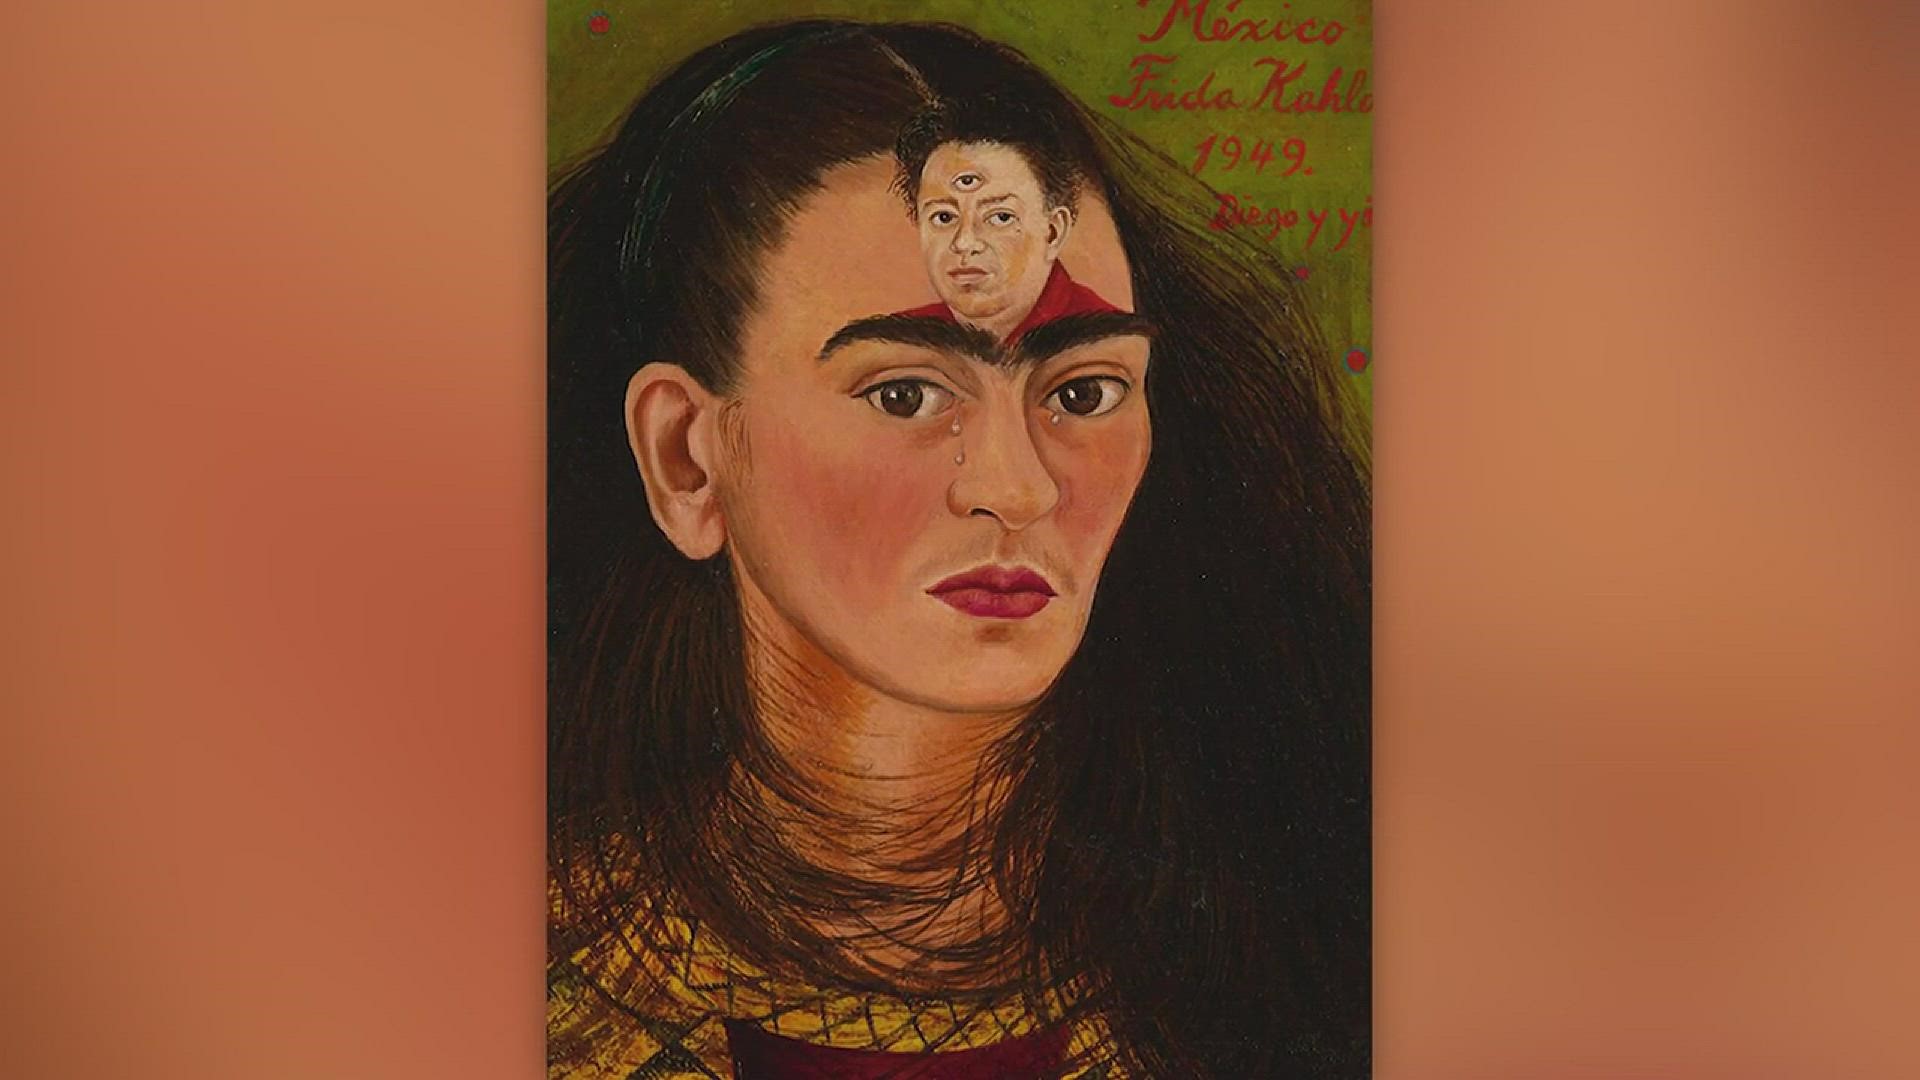 Frida Kahlo's self-portrait set a record for the highest price paid for a painting by a Latin American artist. The painting was sold at an auction on Tuesday night.